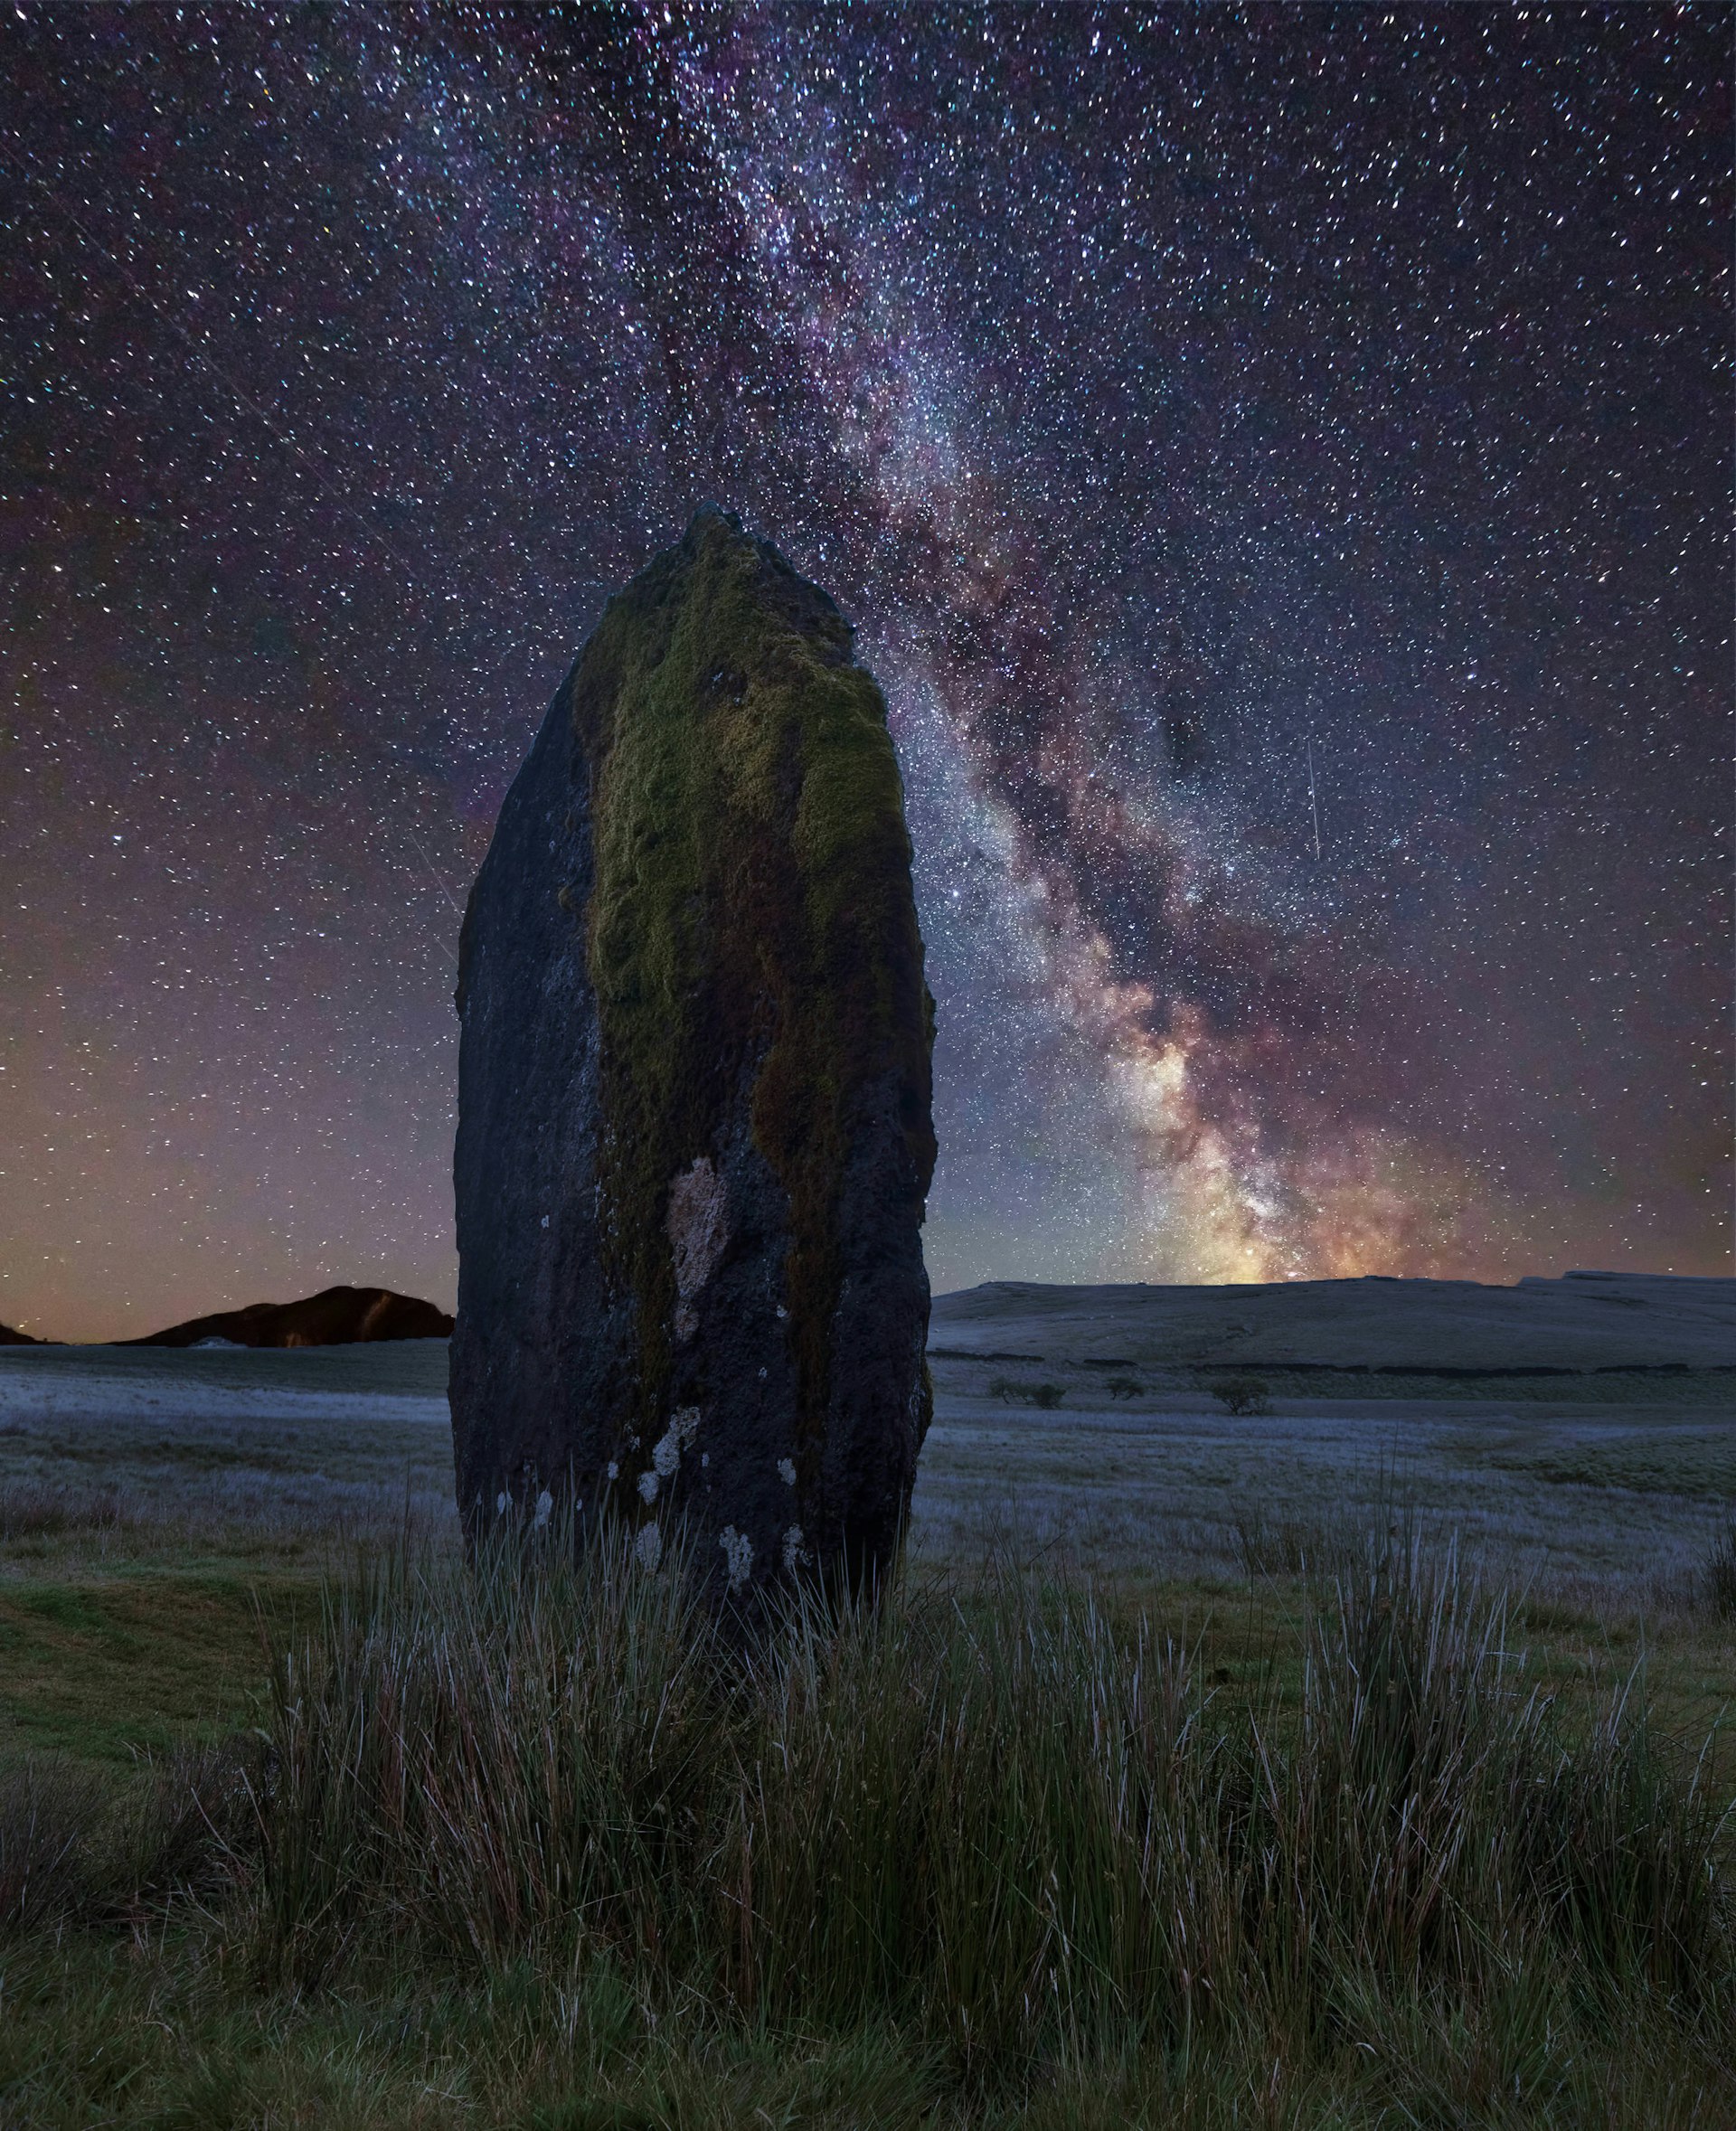 Night sky with the Milky Way over landscape of ancient prehistoric stones in Brecon Beacons National Park, Wales